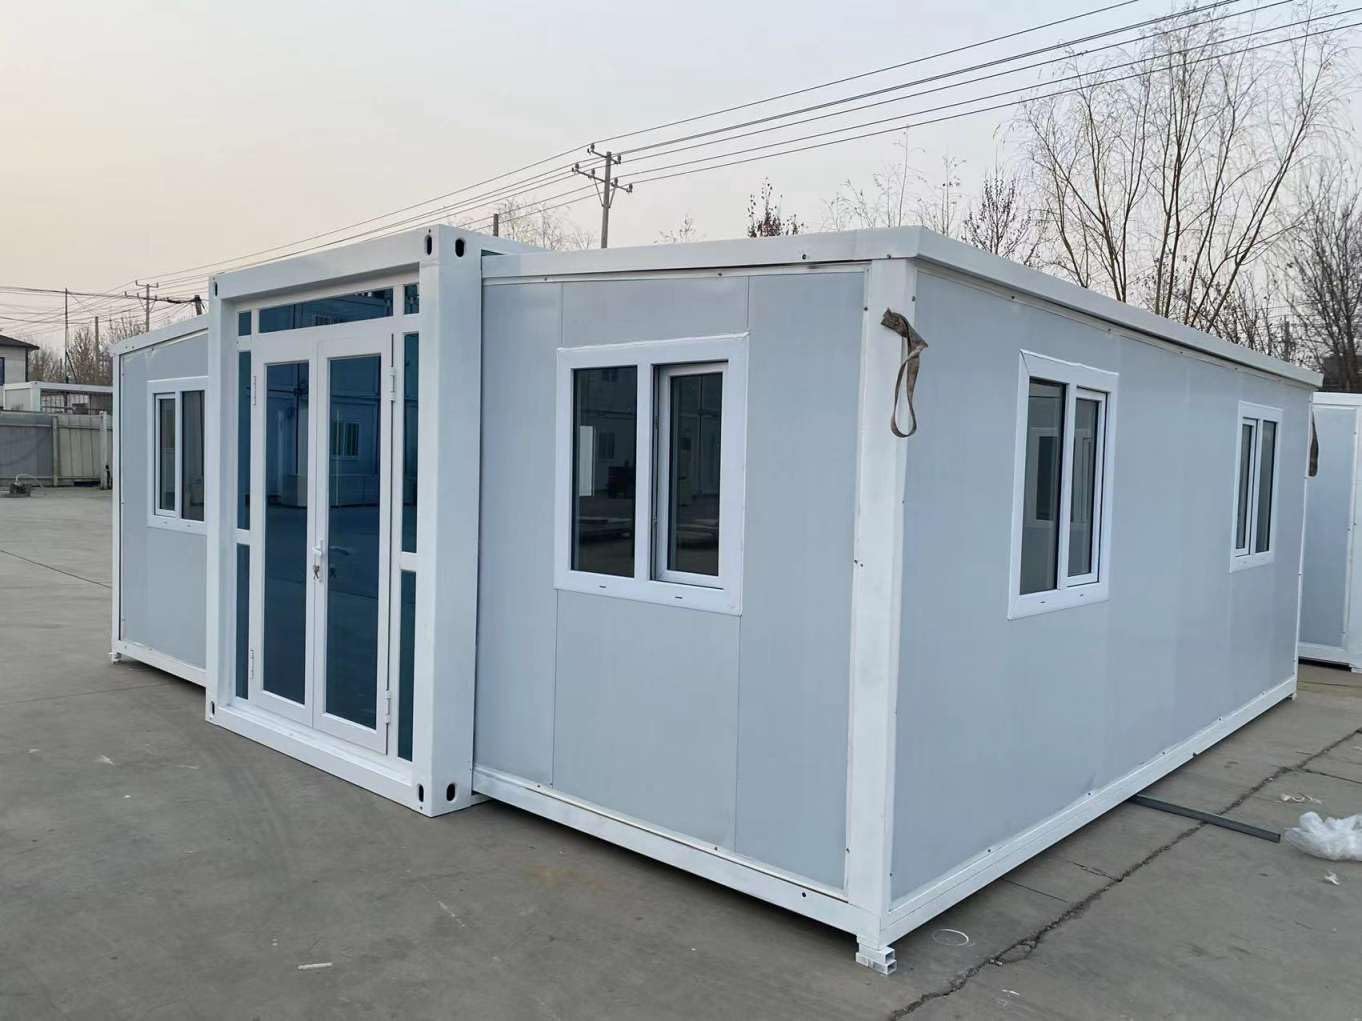 Portable Prefabricated Tiny Home, 20ft x 19ft (with Restroom), Mobile Expandable Plastic prefab House for Hotel, Live, Work, Villa, Warehouse, Workshop